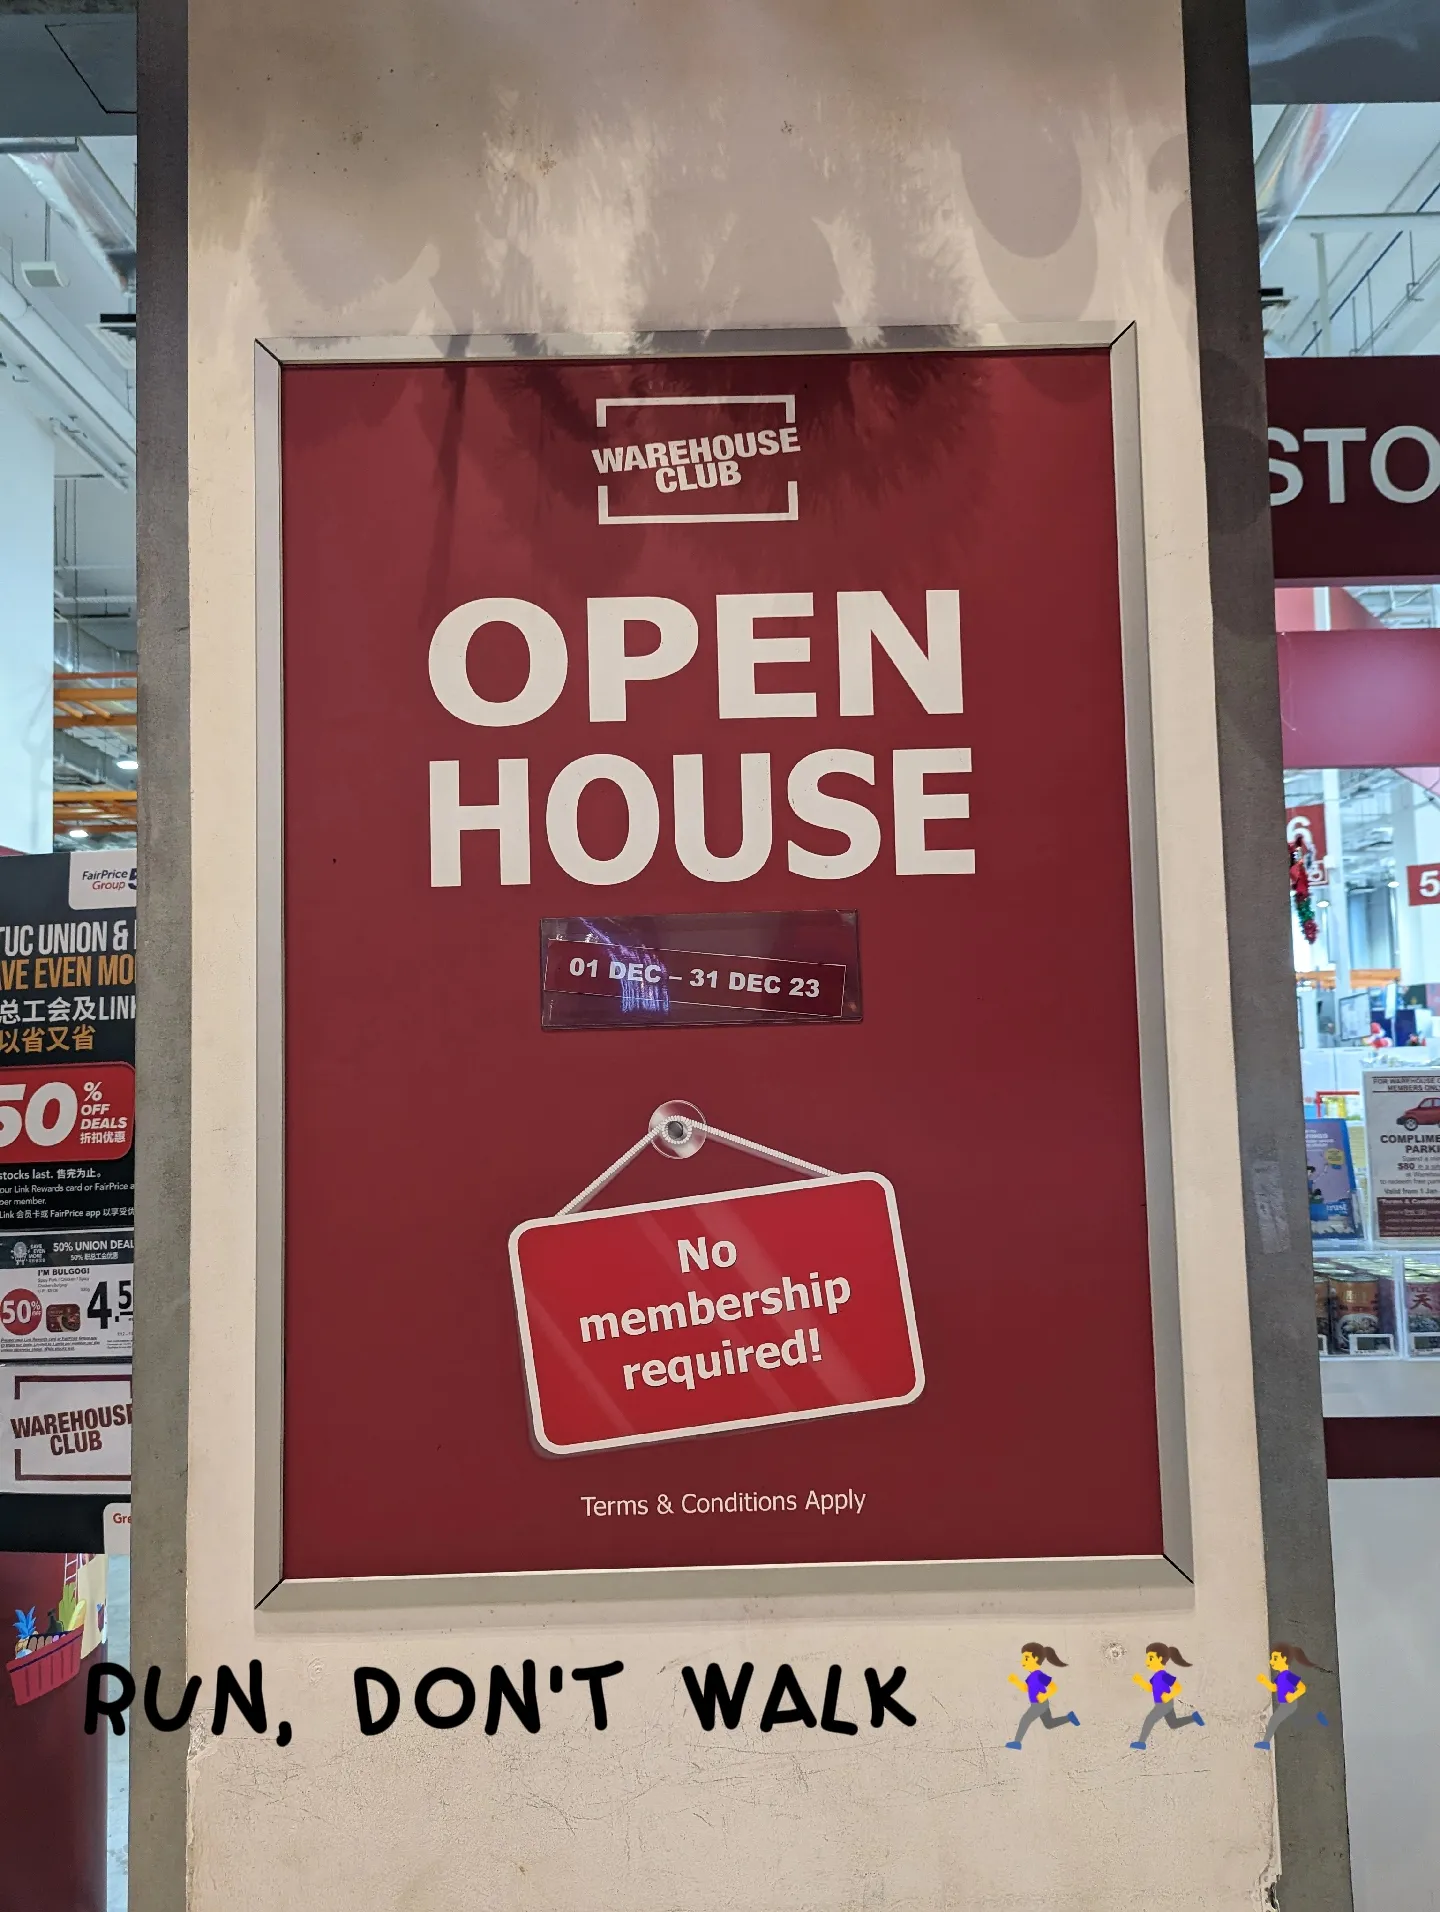 costco in Singapore? sign me up 💁🏻‍♀️'s images(0)